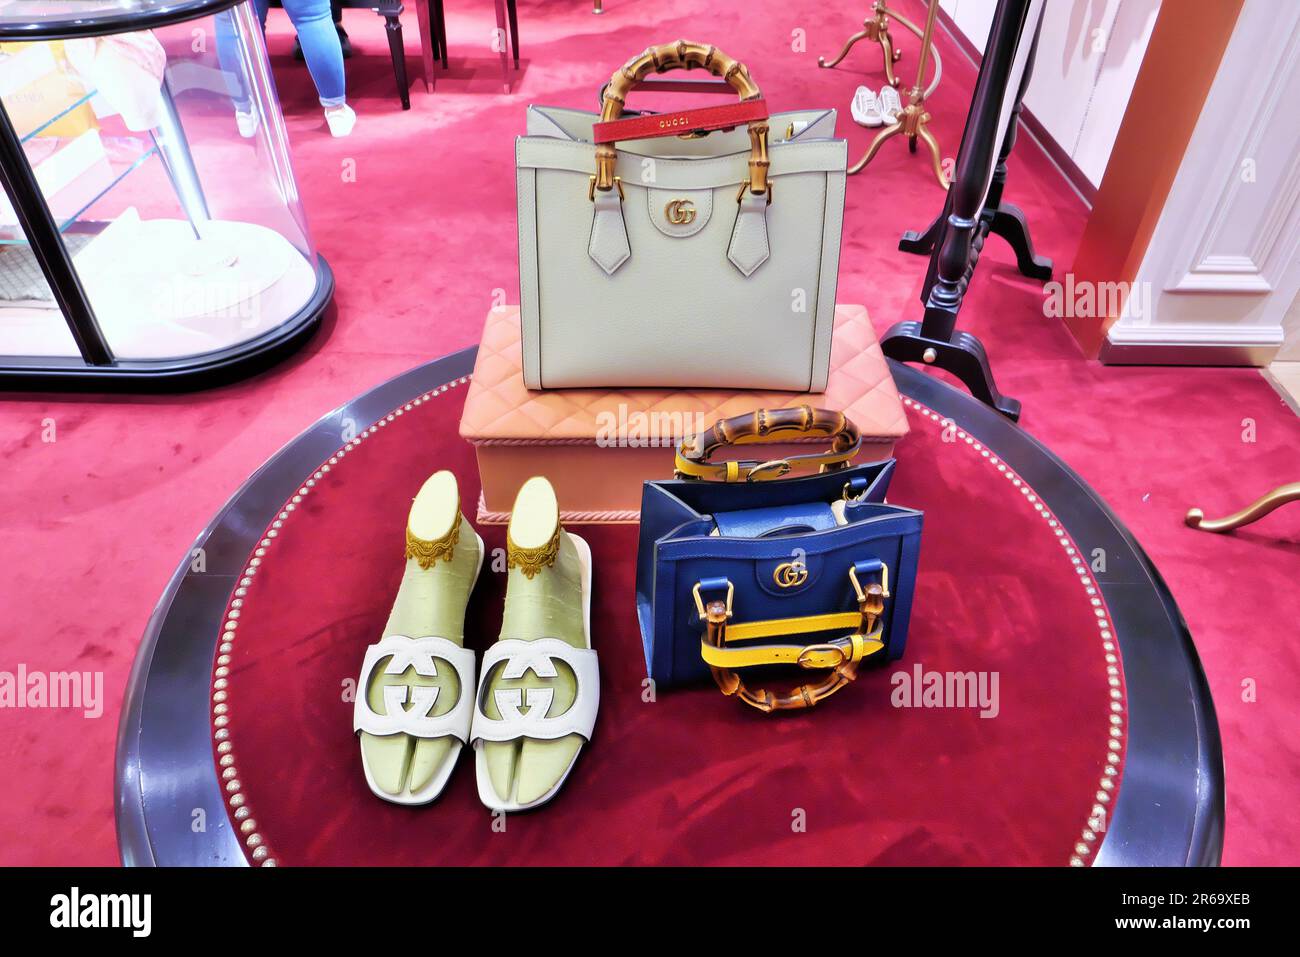 GUCCI BAGS AND SHOES ON DISPLAY INSIDE THE FASHION STORE Stock Photo - Alamy